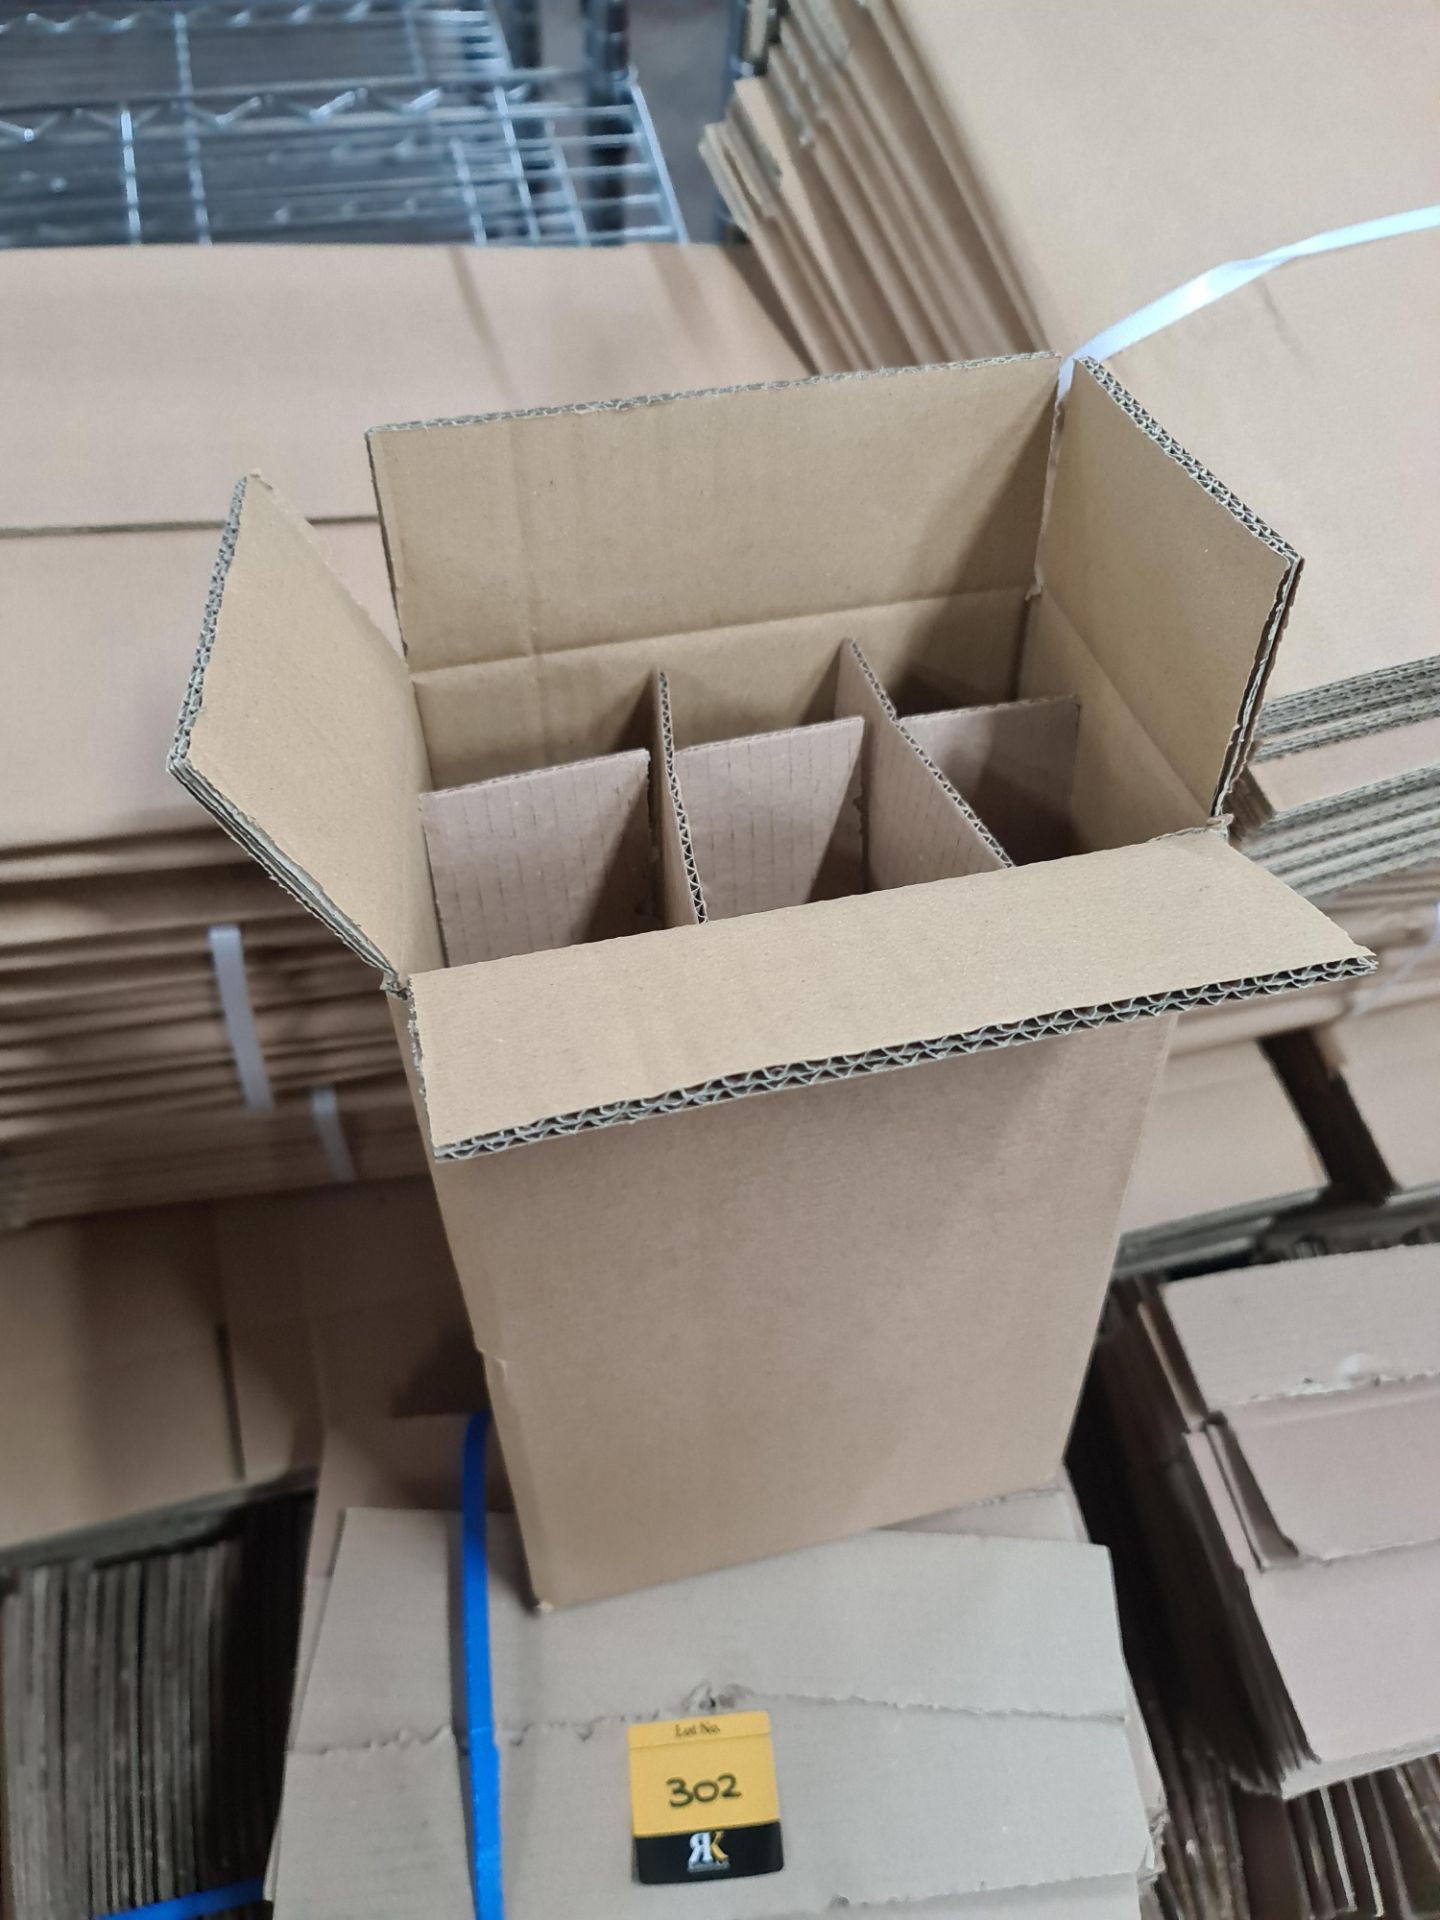 The contents of a pallet of cardboard boxes and inserts, comprising approximately 200 boxes and 450